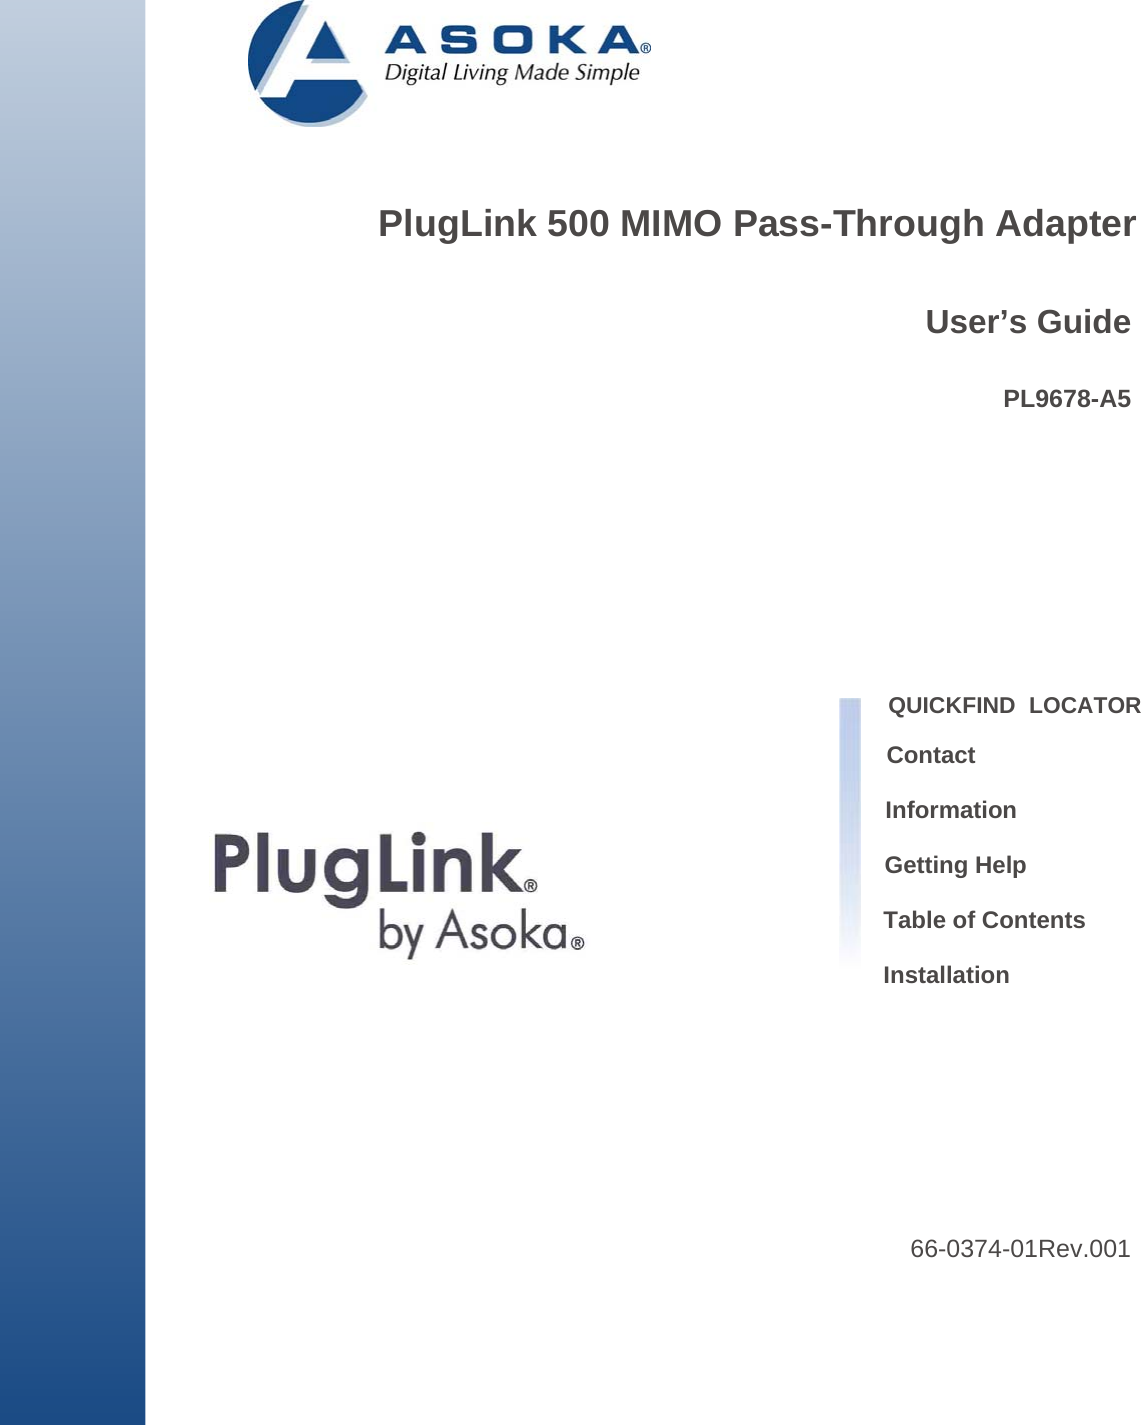                             PlugLink 500 MIMO Pass-Through Adapter   User’s Guide  PL9678-A5             QUICKFIND  LOCATOR  Contact  Information  Getting Help   Table of Contents   Installation             66-0374-01Rev.001 